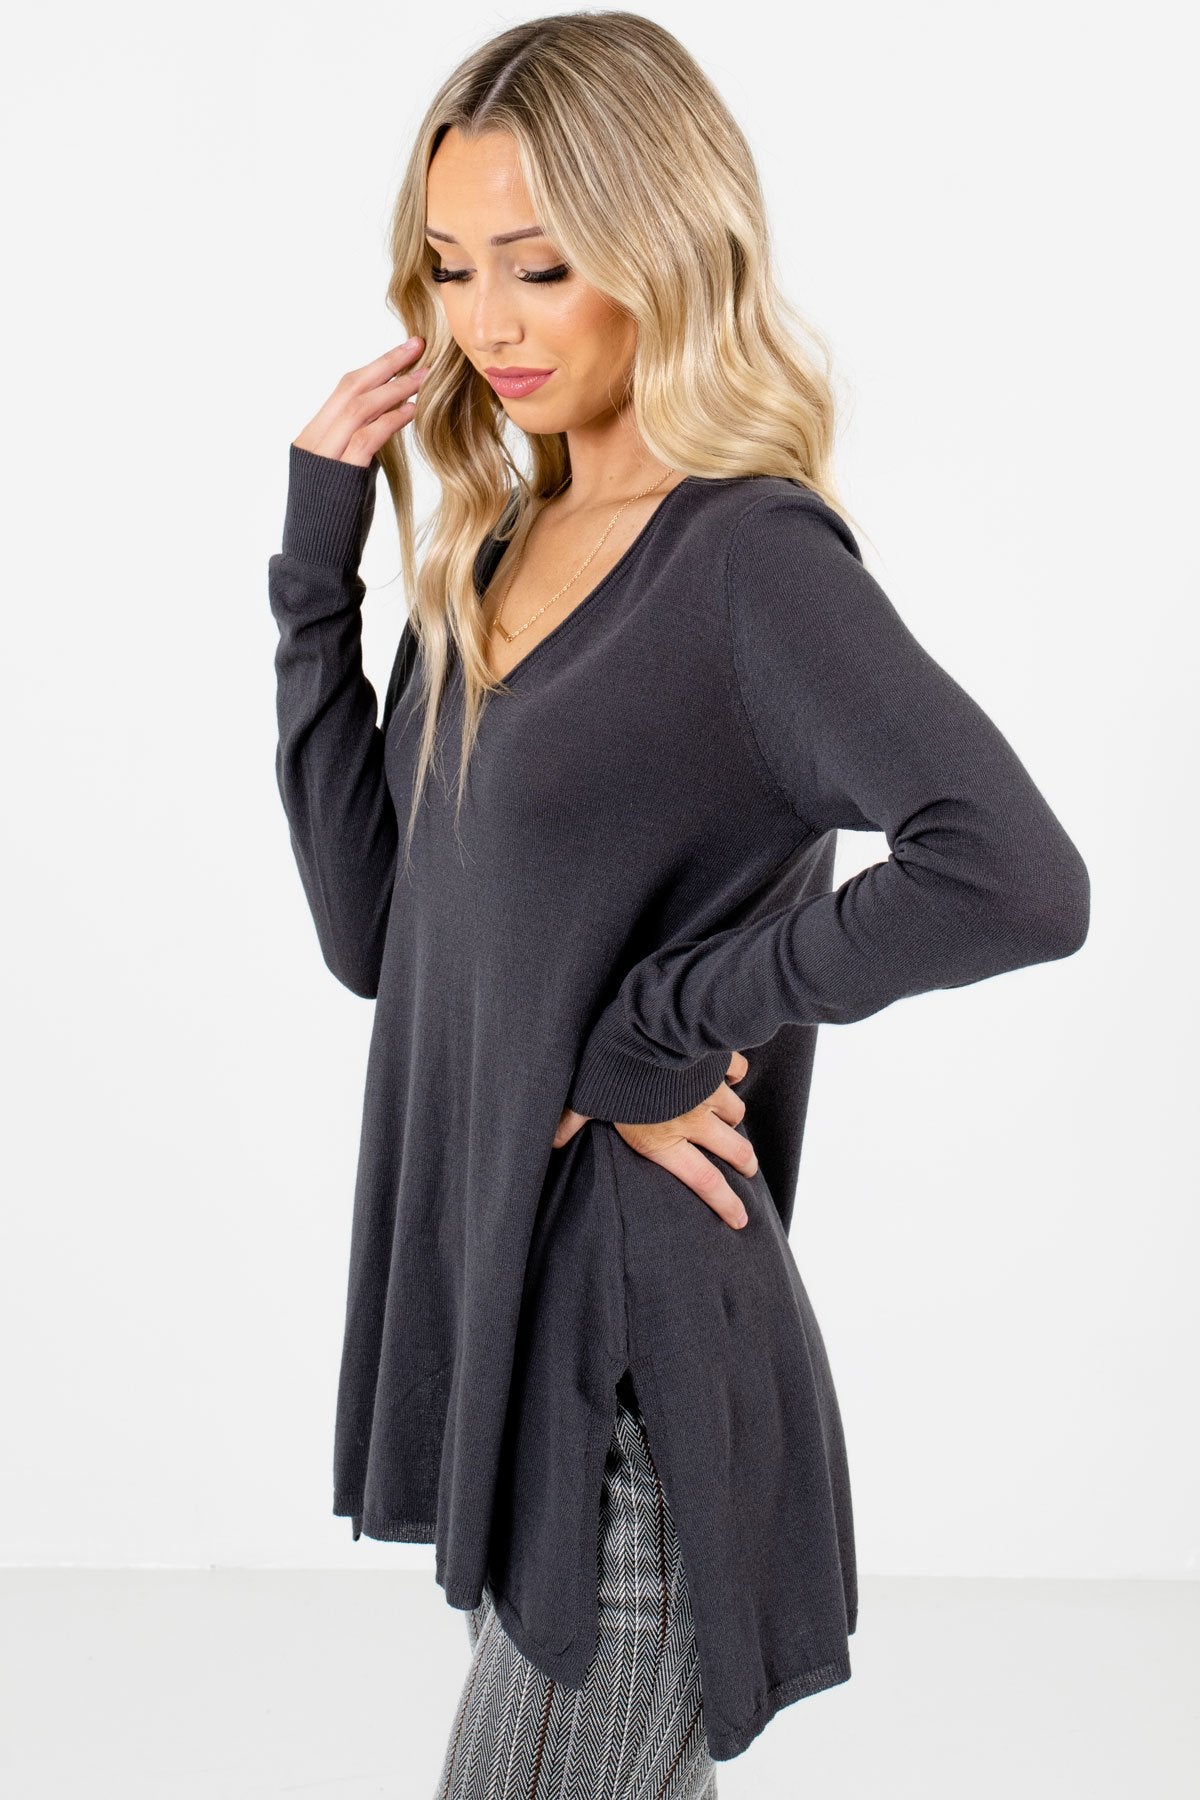 Charcoal Gray V-Neckline Boutique Sweaters for Women